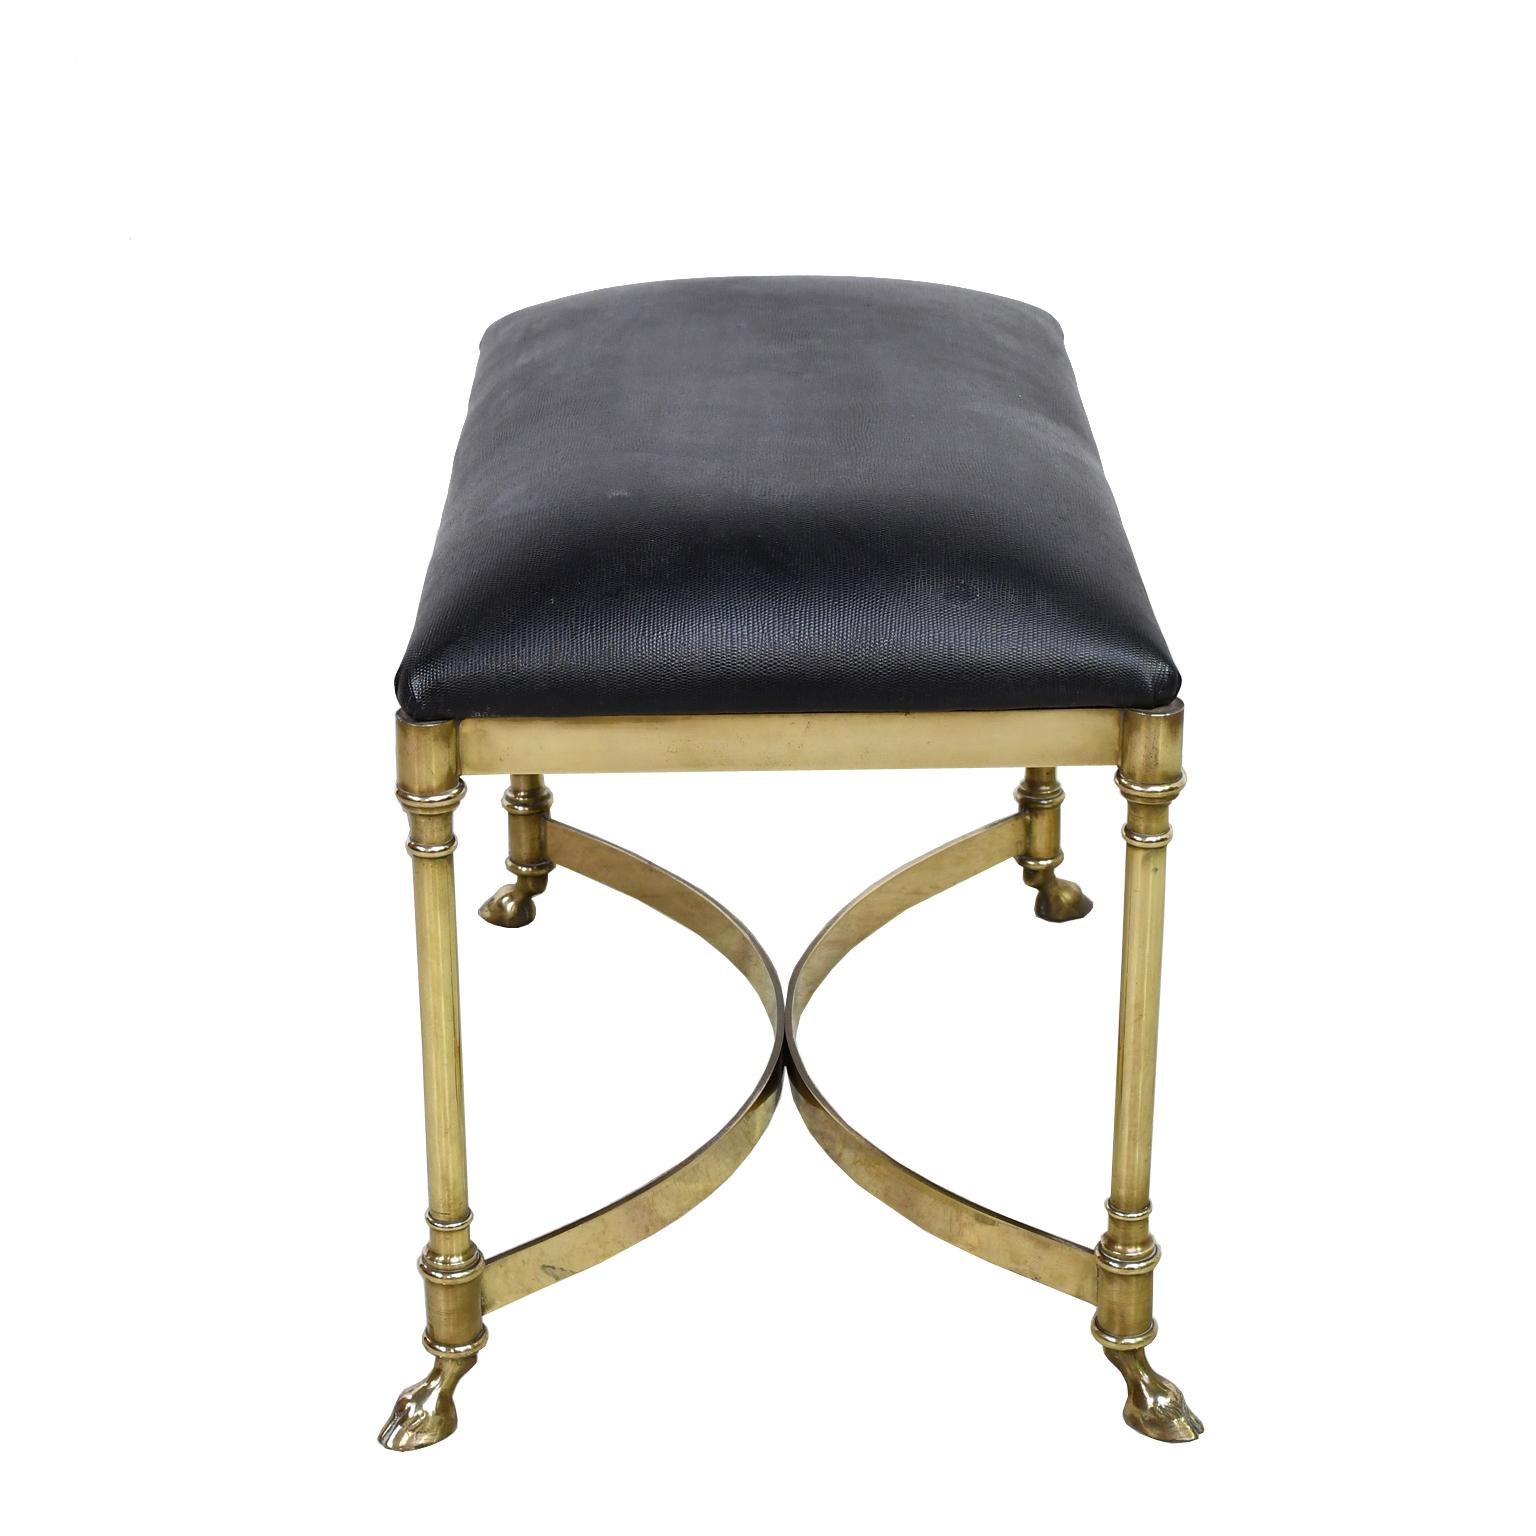 Neoclassical-Style Vintage Italian Stool w/ Brass Frame & Black Upholstered Seat 2